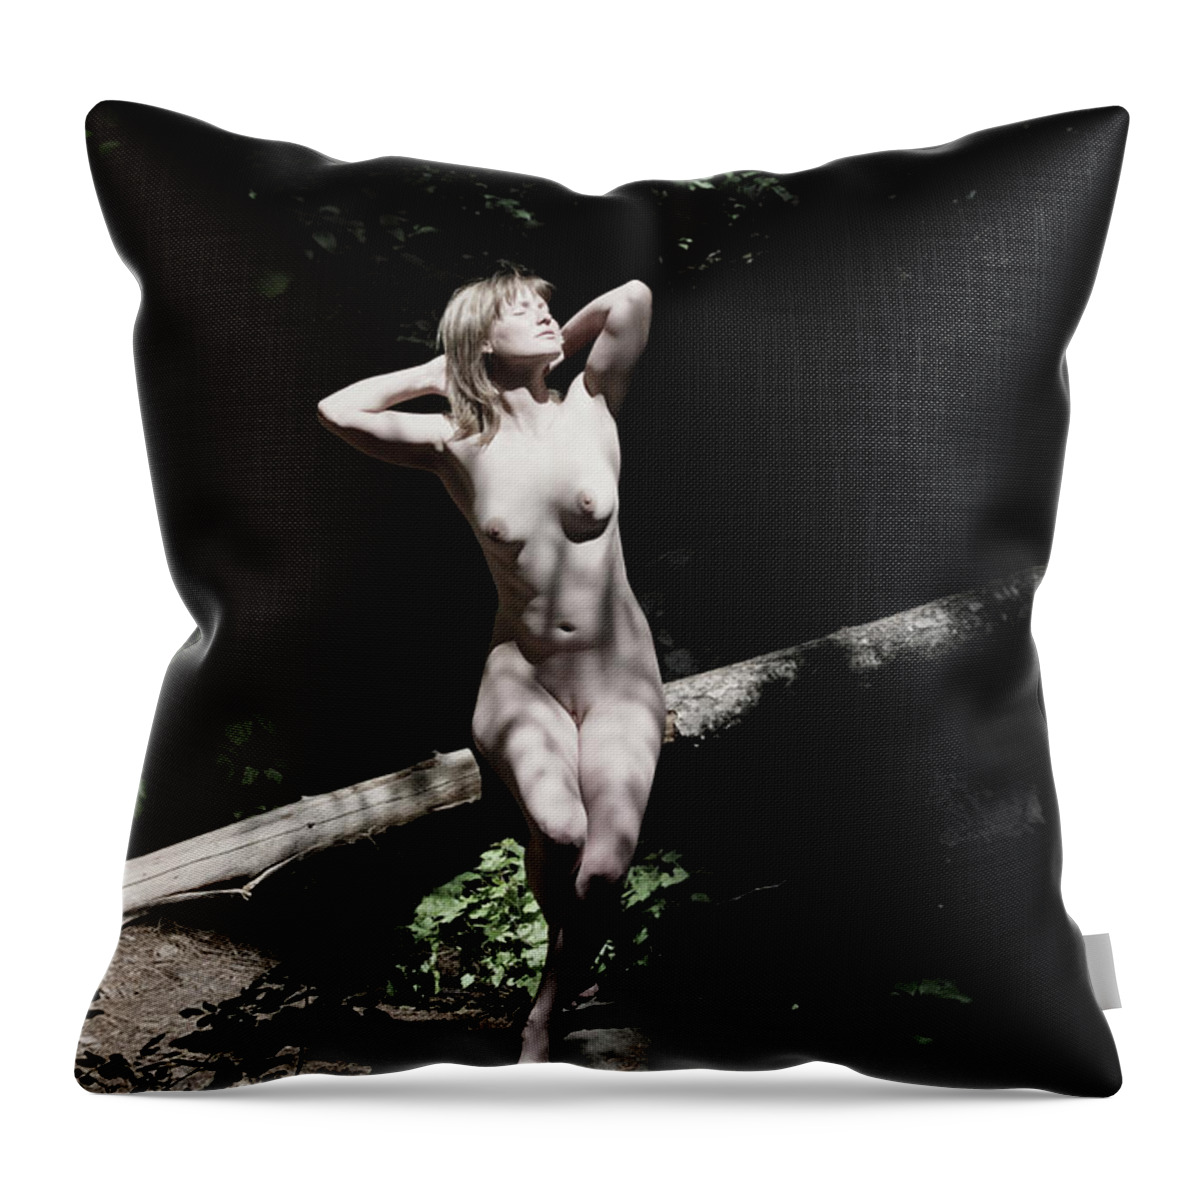 Girl Throw Pillow featuring the photograph Sun Sprinkled by Robert WK Clark